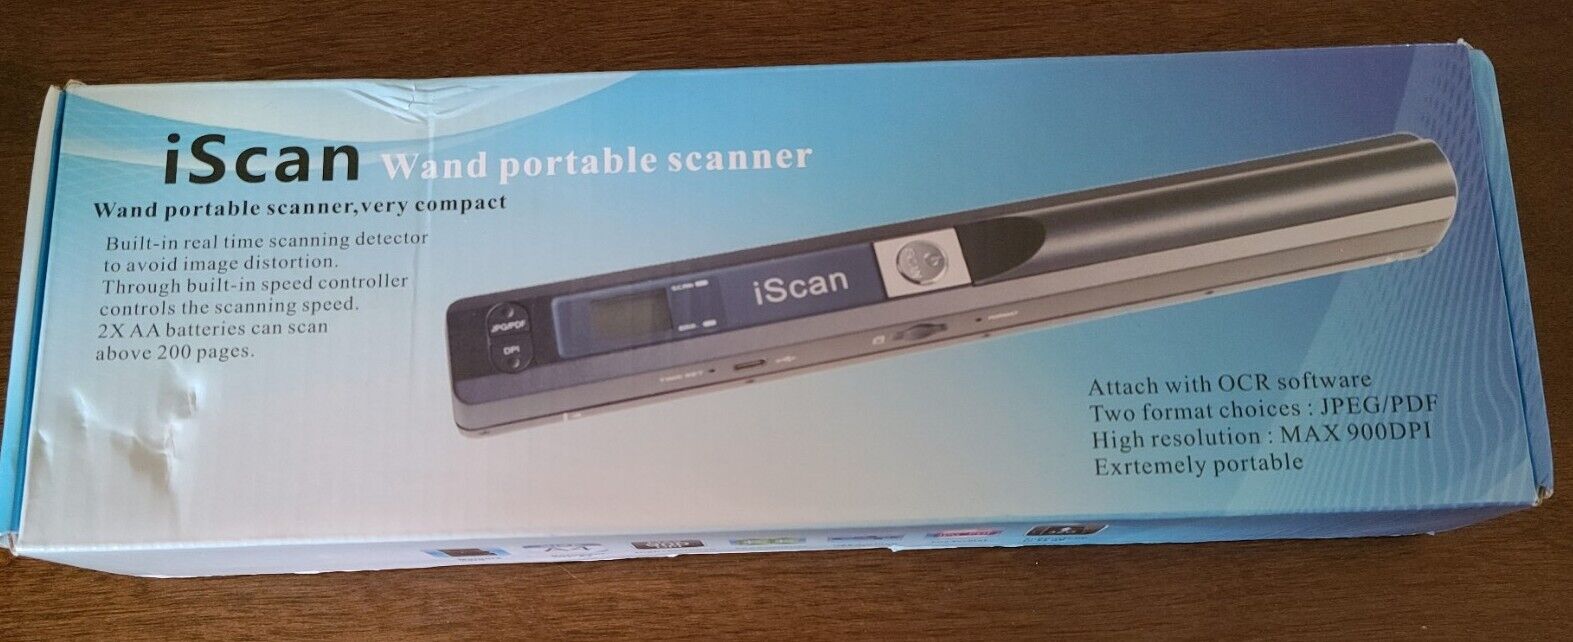 Portable Scanner iScan 900DPI Cordless Wand Portable  Handheld, Compact - Black